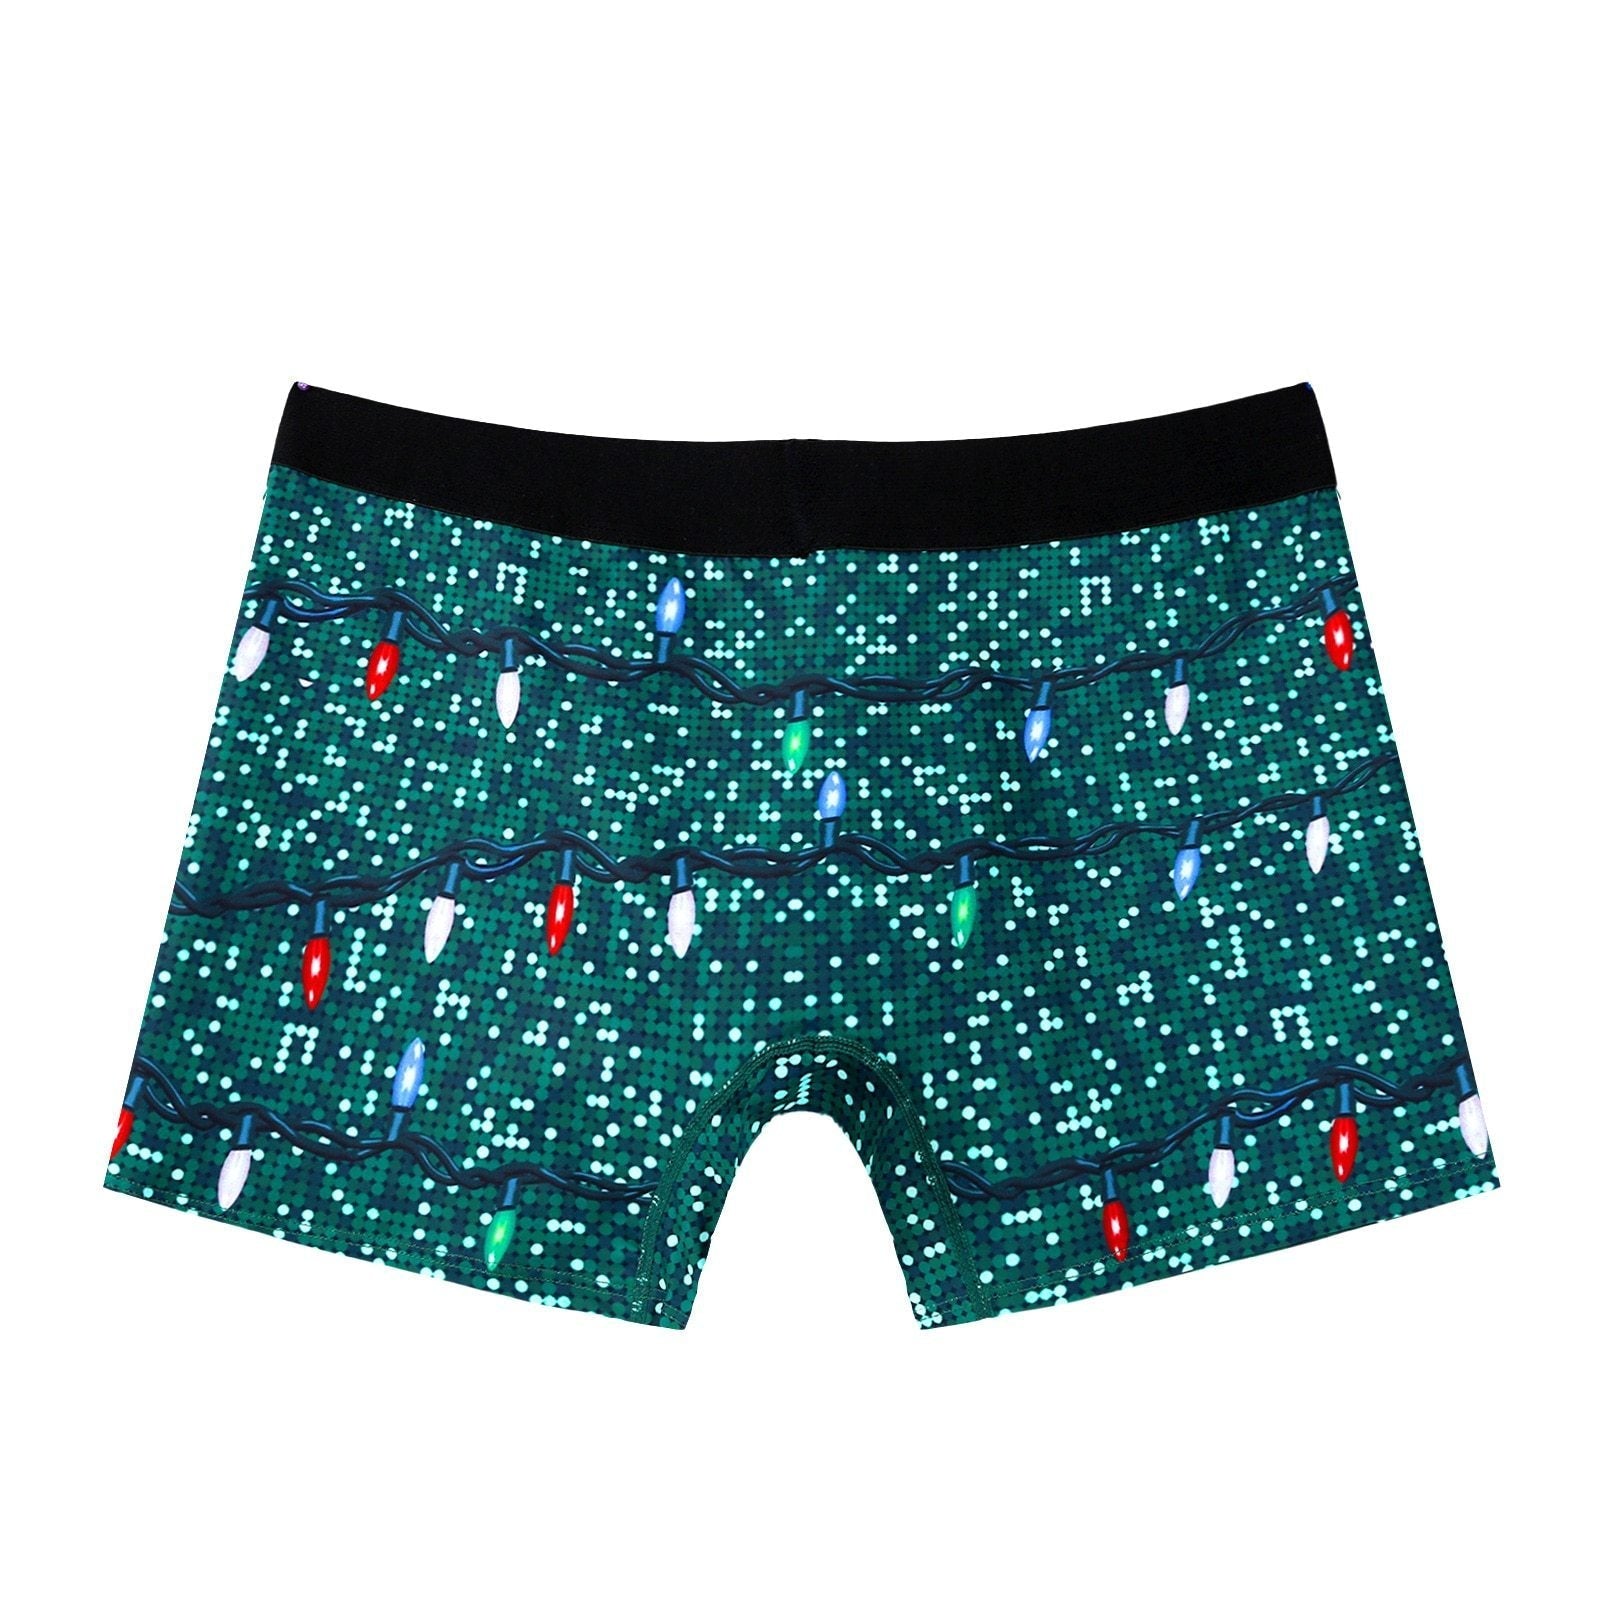 JCSTK - XMAS GIFT - Mens Christmas or Fun Party Time Boxer Briefs in a Gliiter & Bow Tie Print Green and White